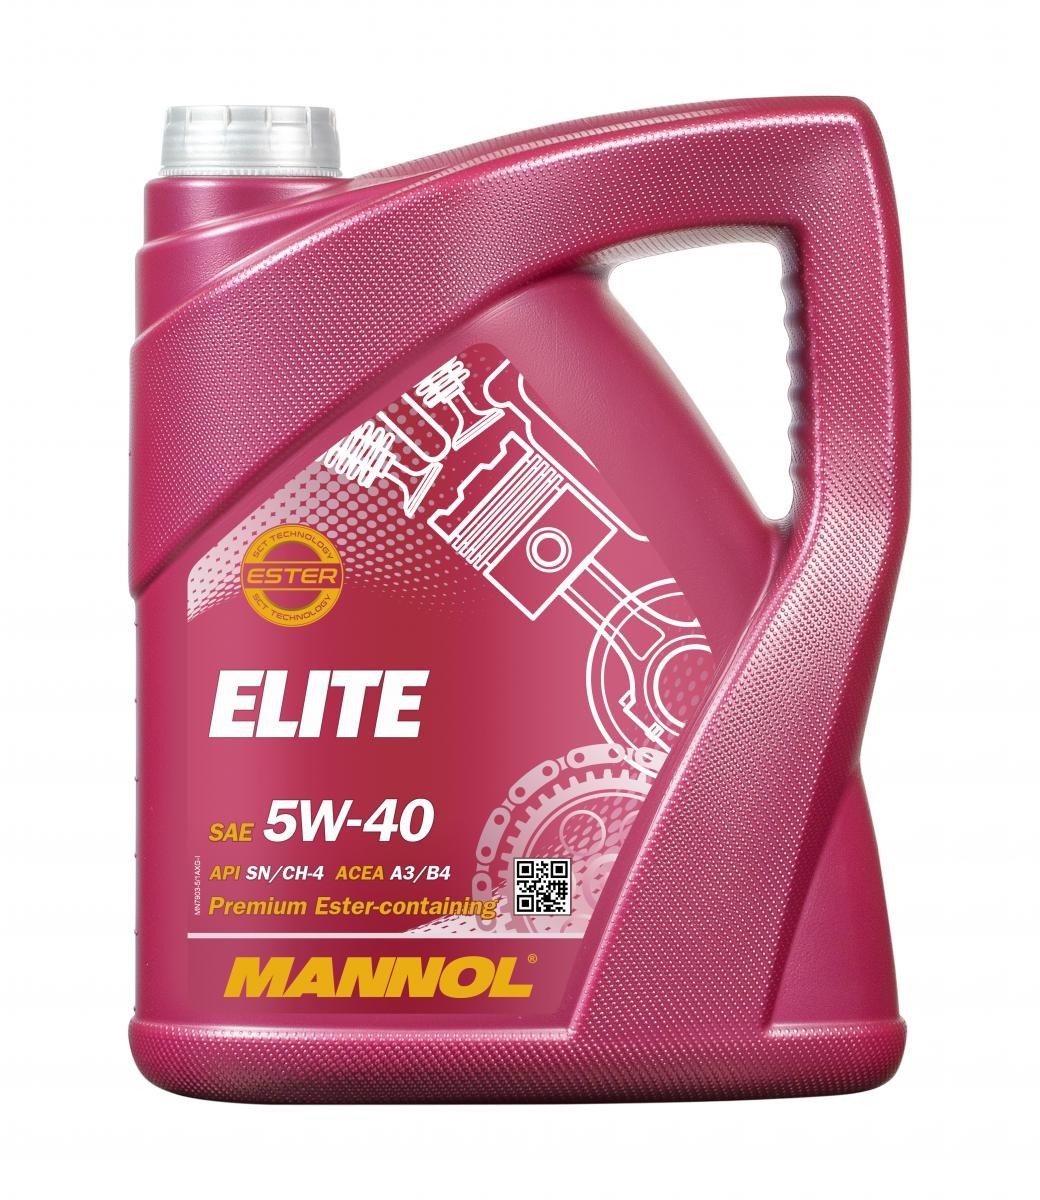 Fully synthetic engine oil diesel Engine oil MANNOL - MN7903-5